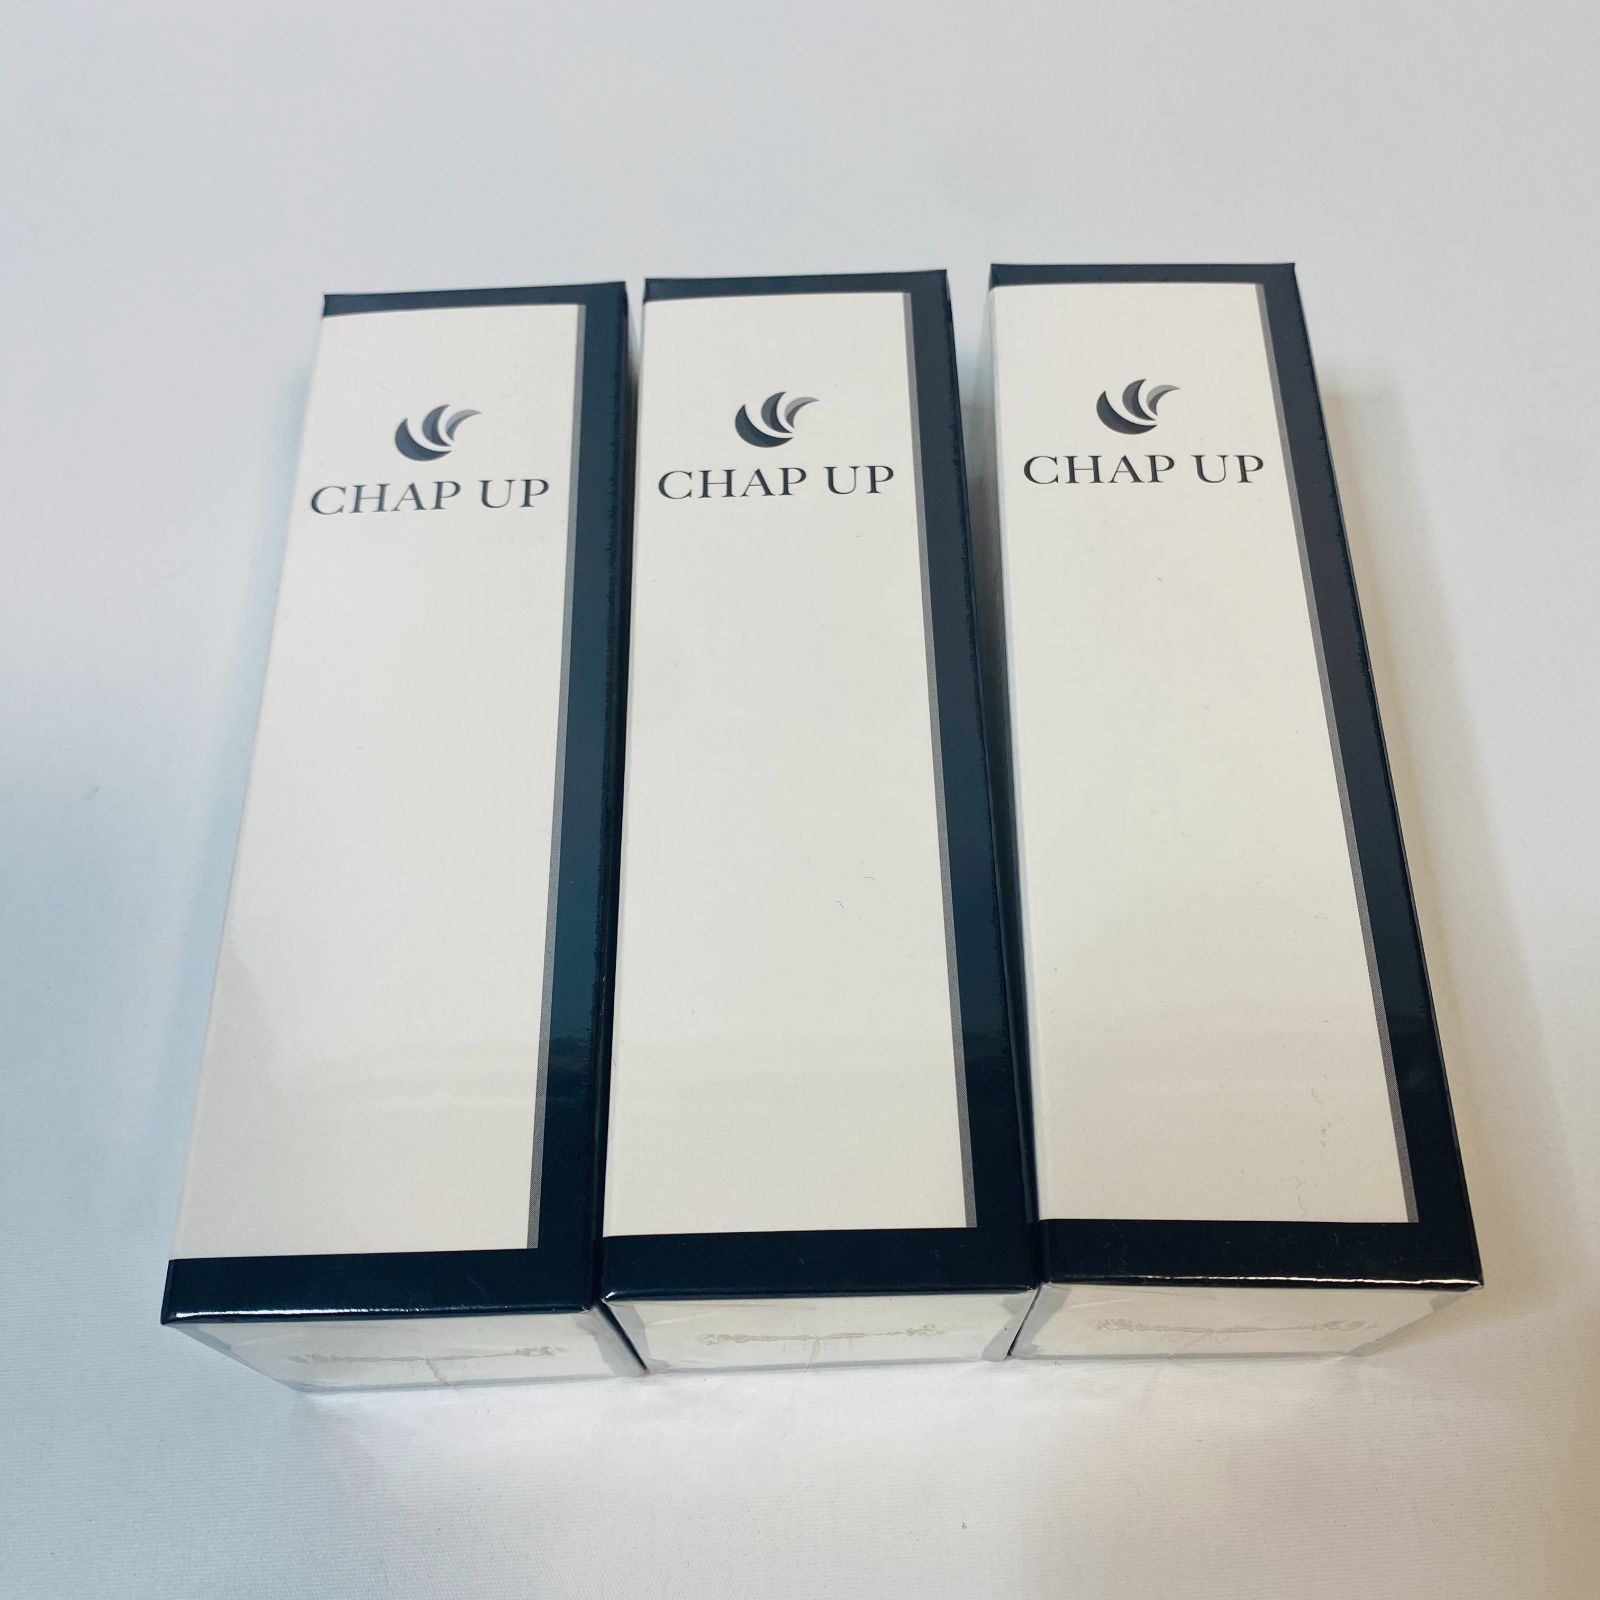 CHAP UP 新品未使用品 3箱セット-